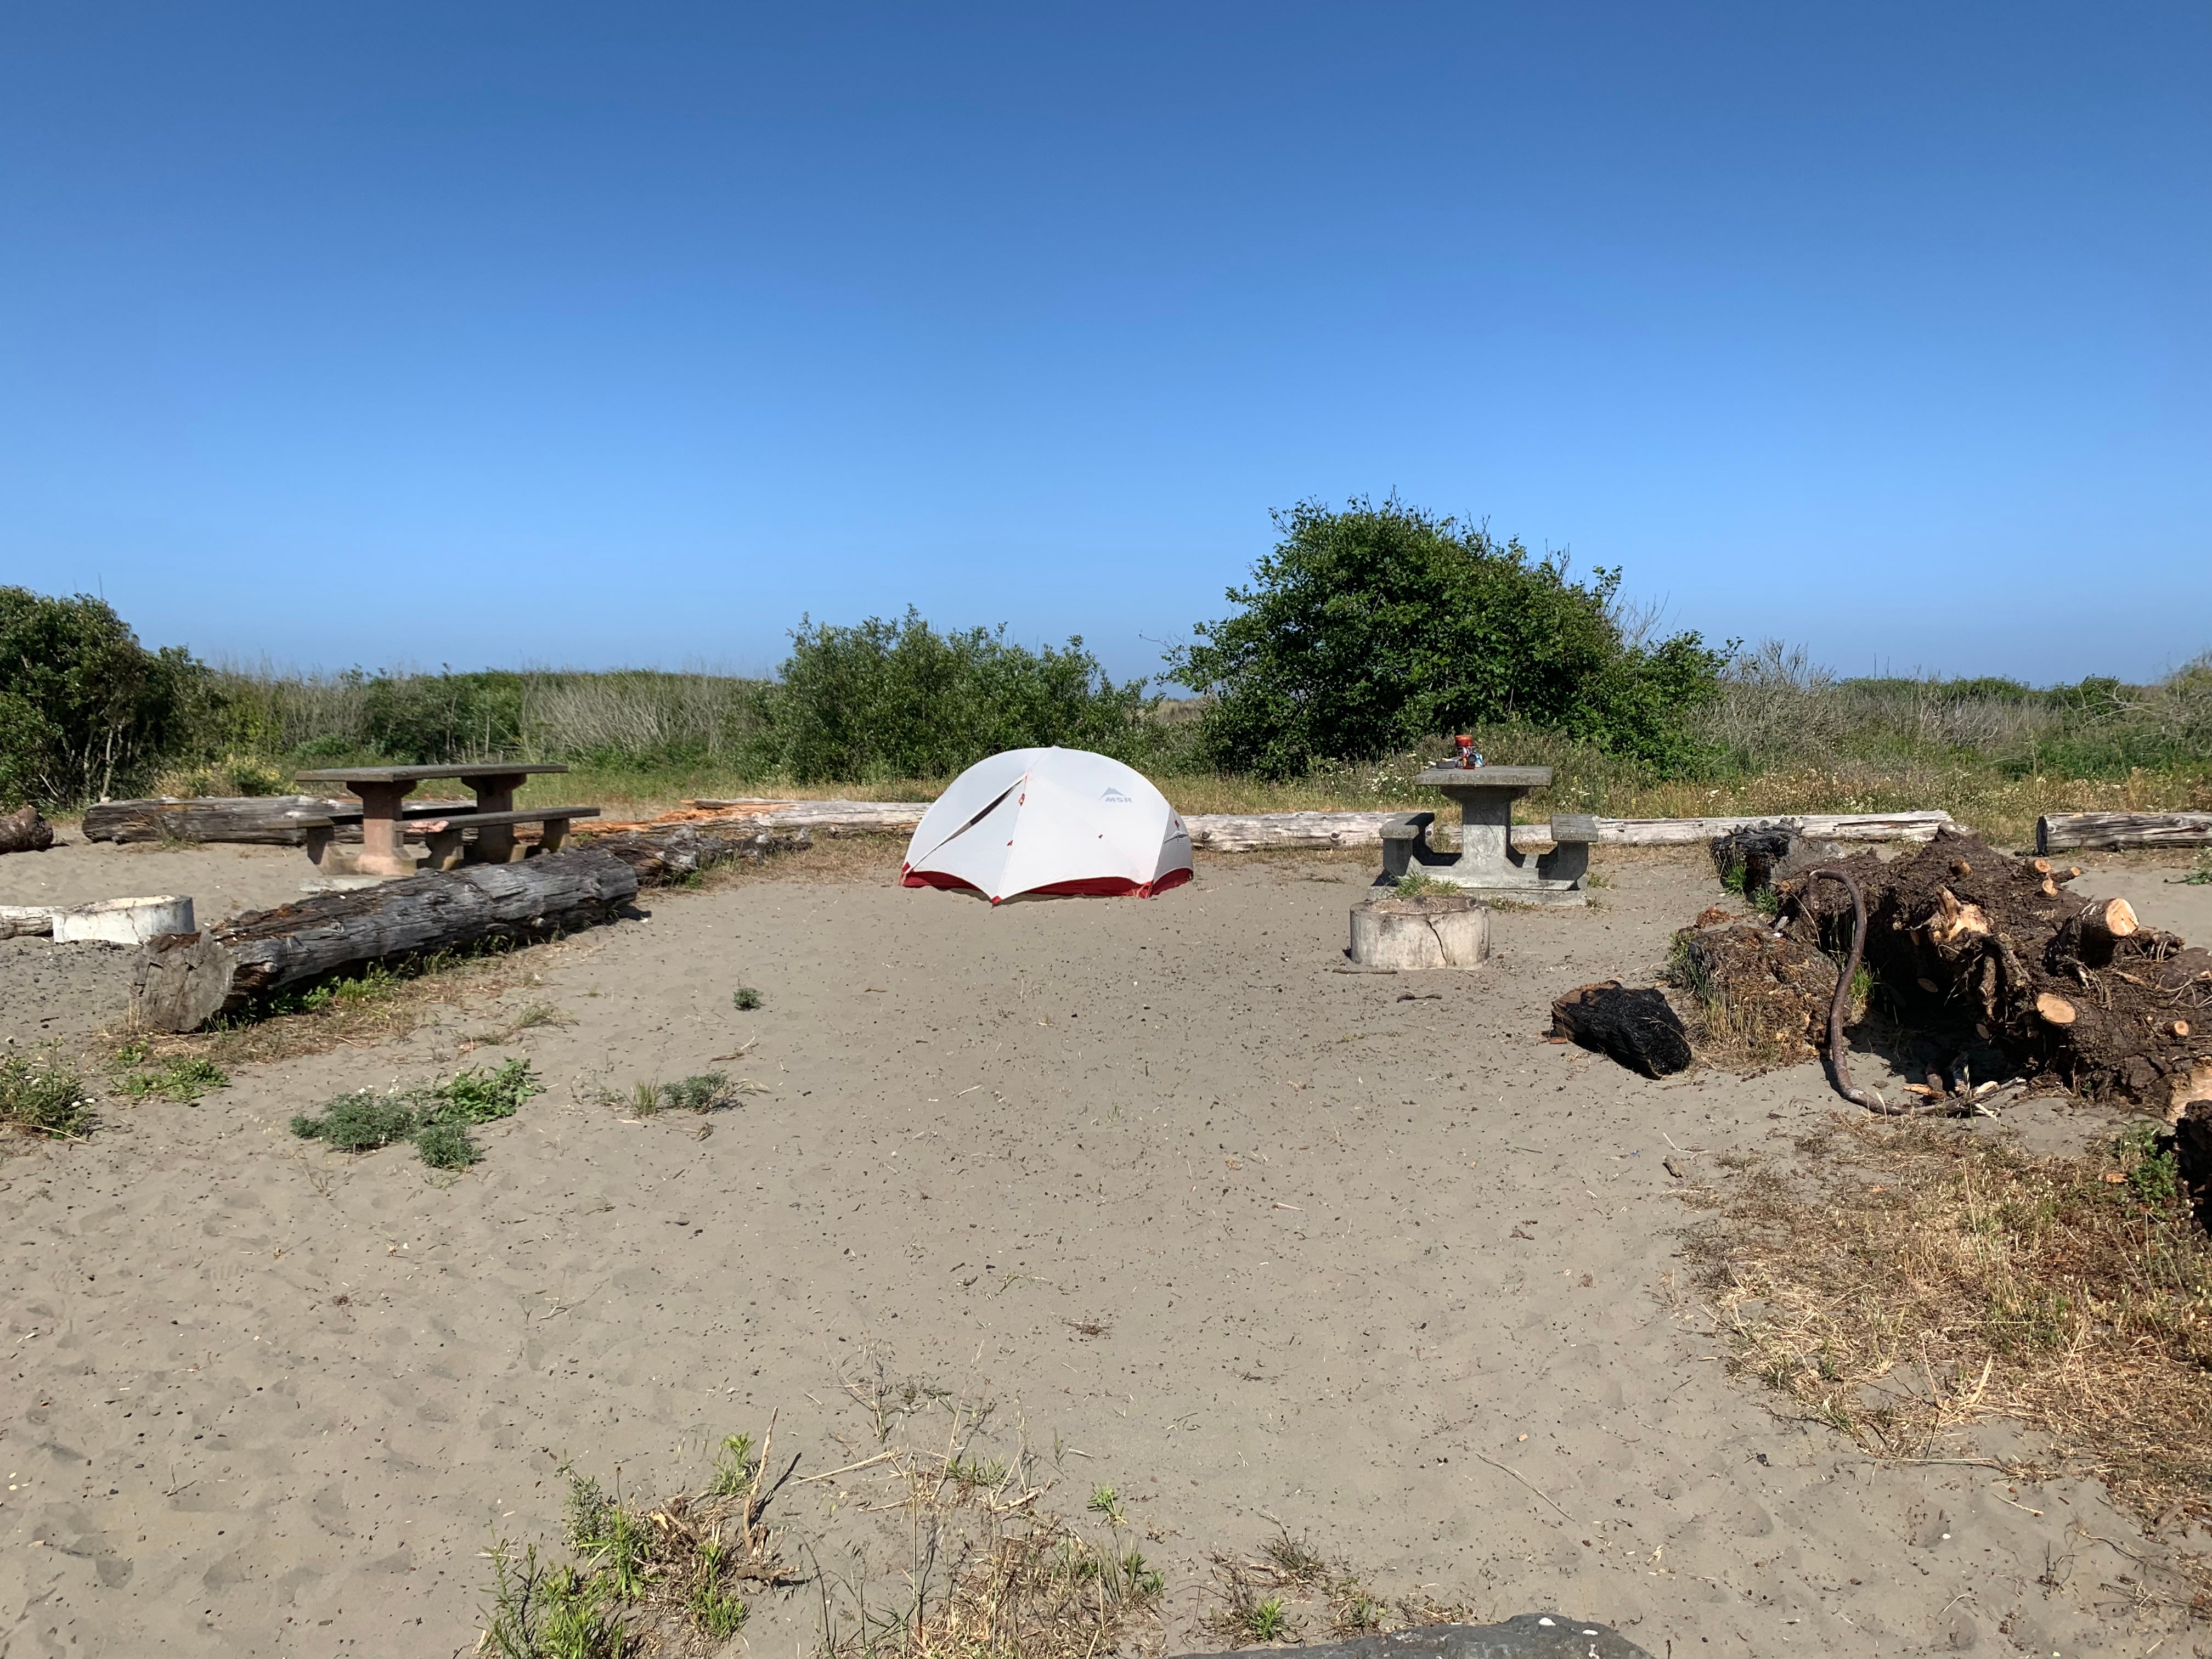 Nice size campsites, but no privacy. Pitch your tent directly on the sand. Fire pits and picnic tables.